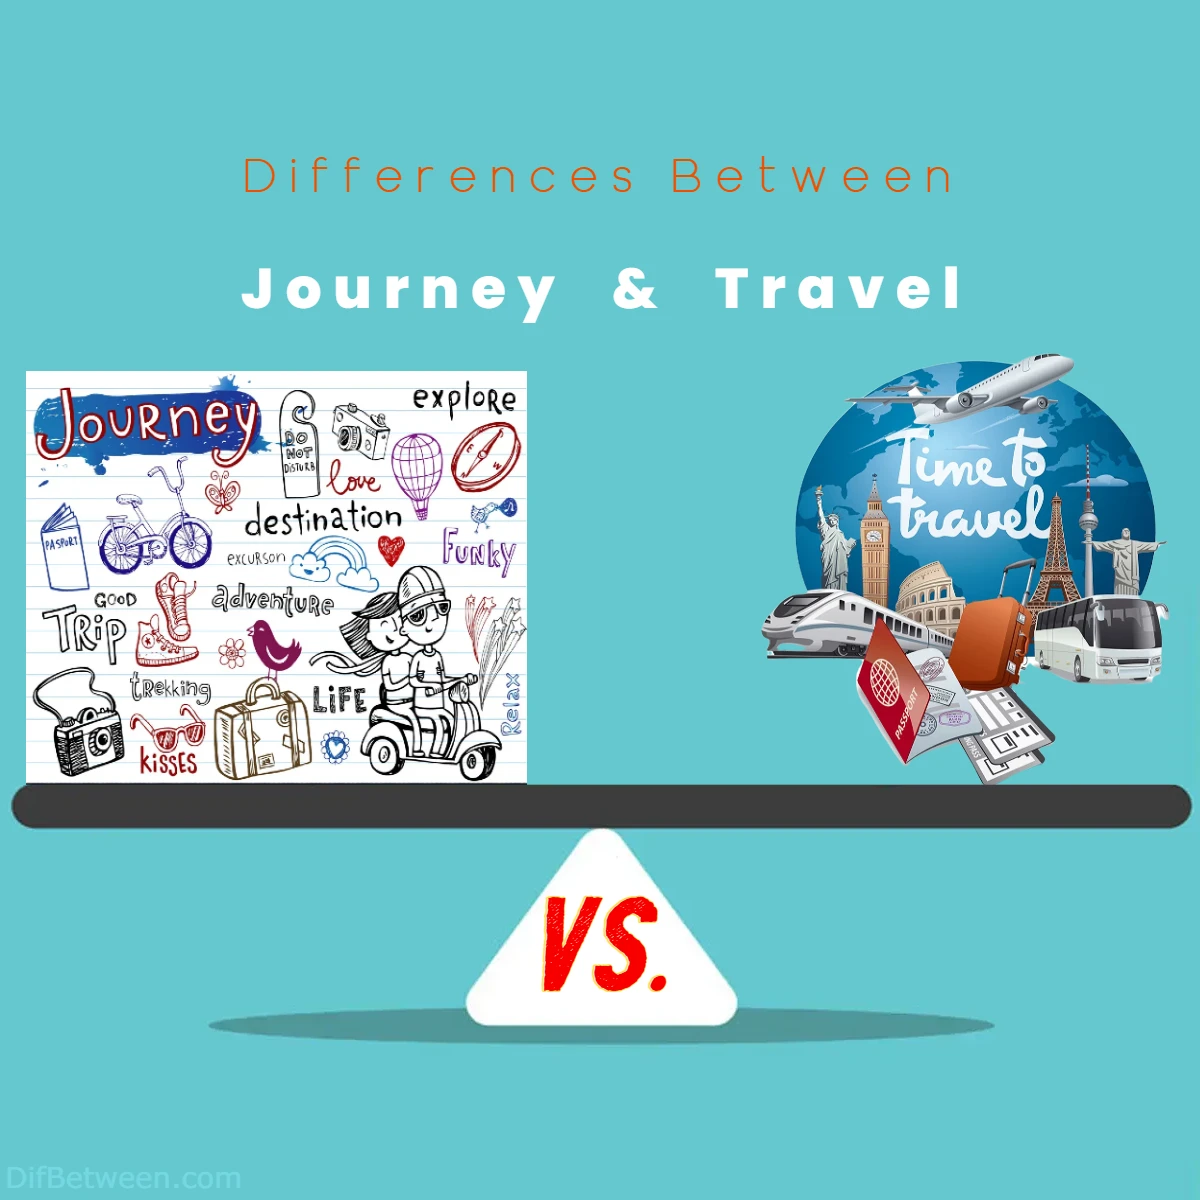 Differences Between Journey vs Travel